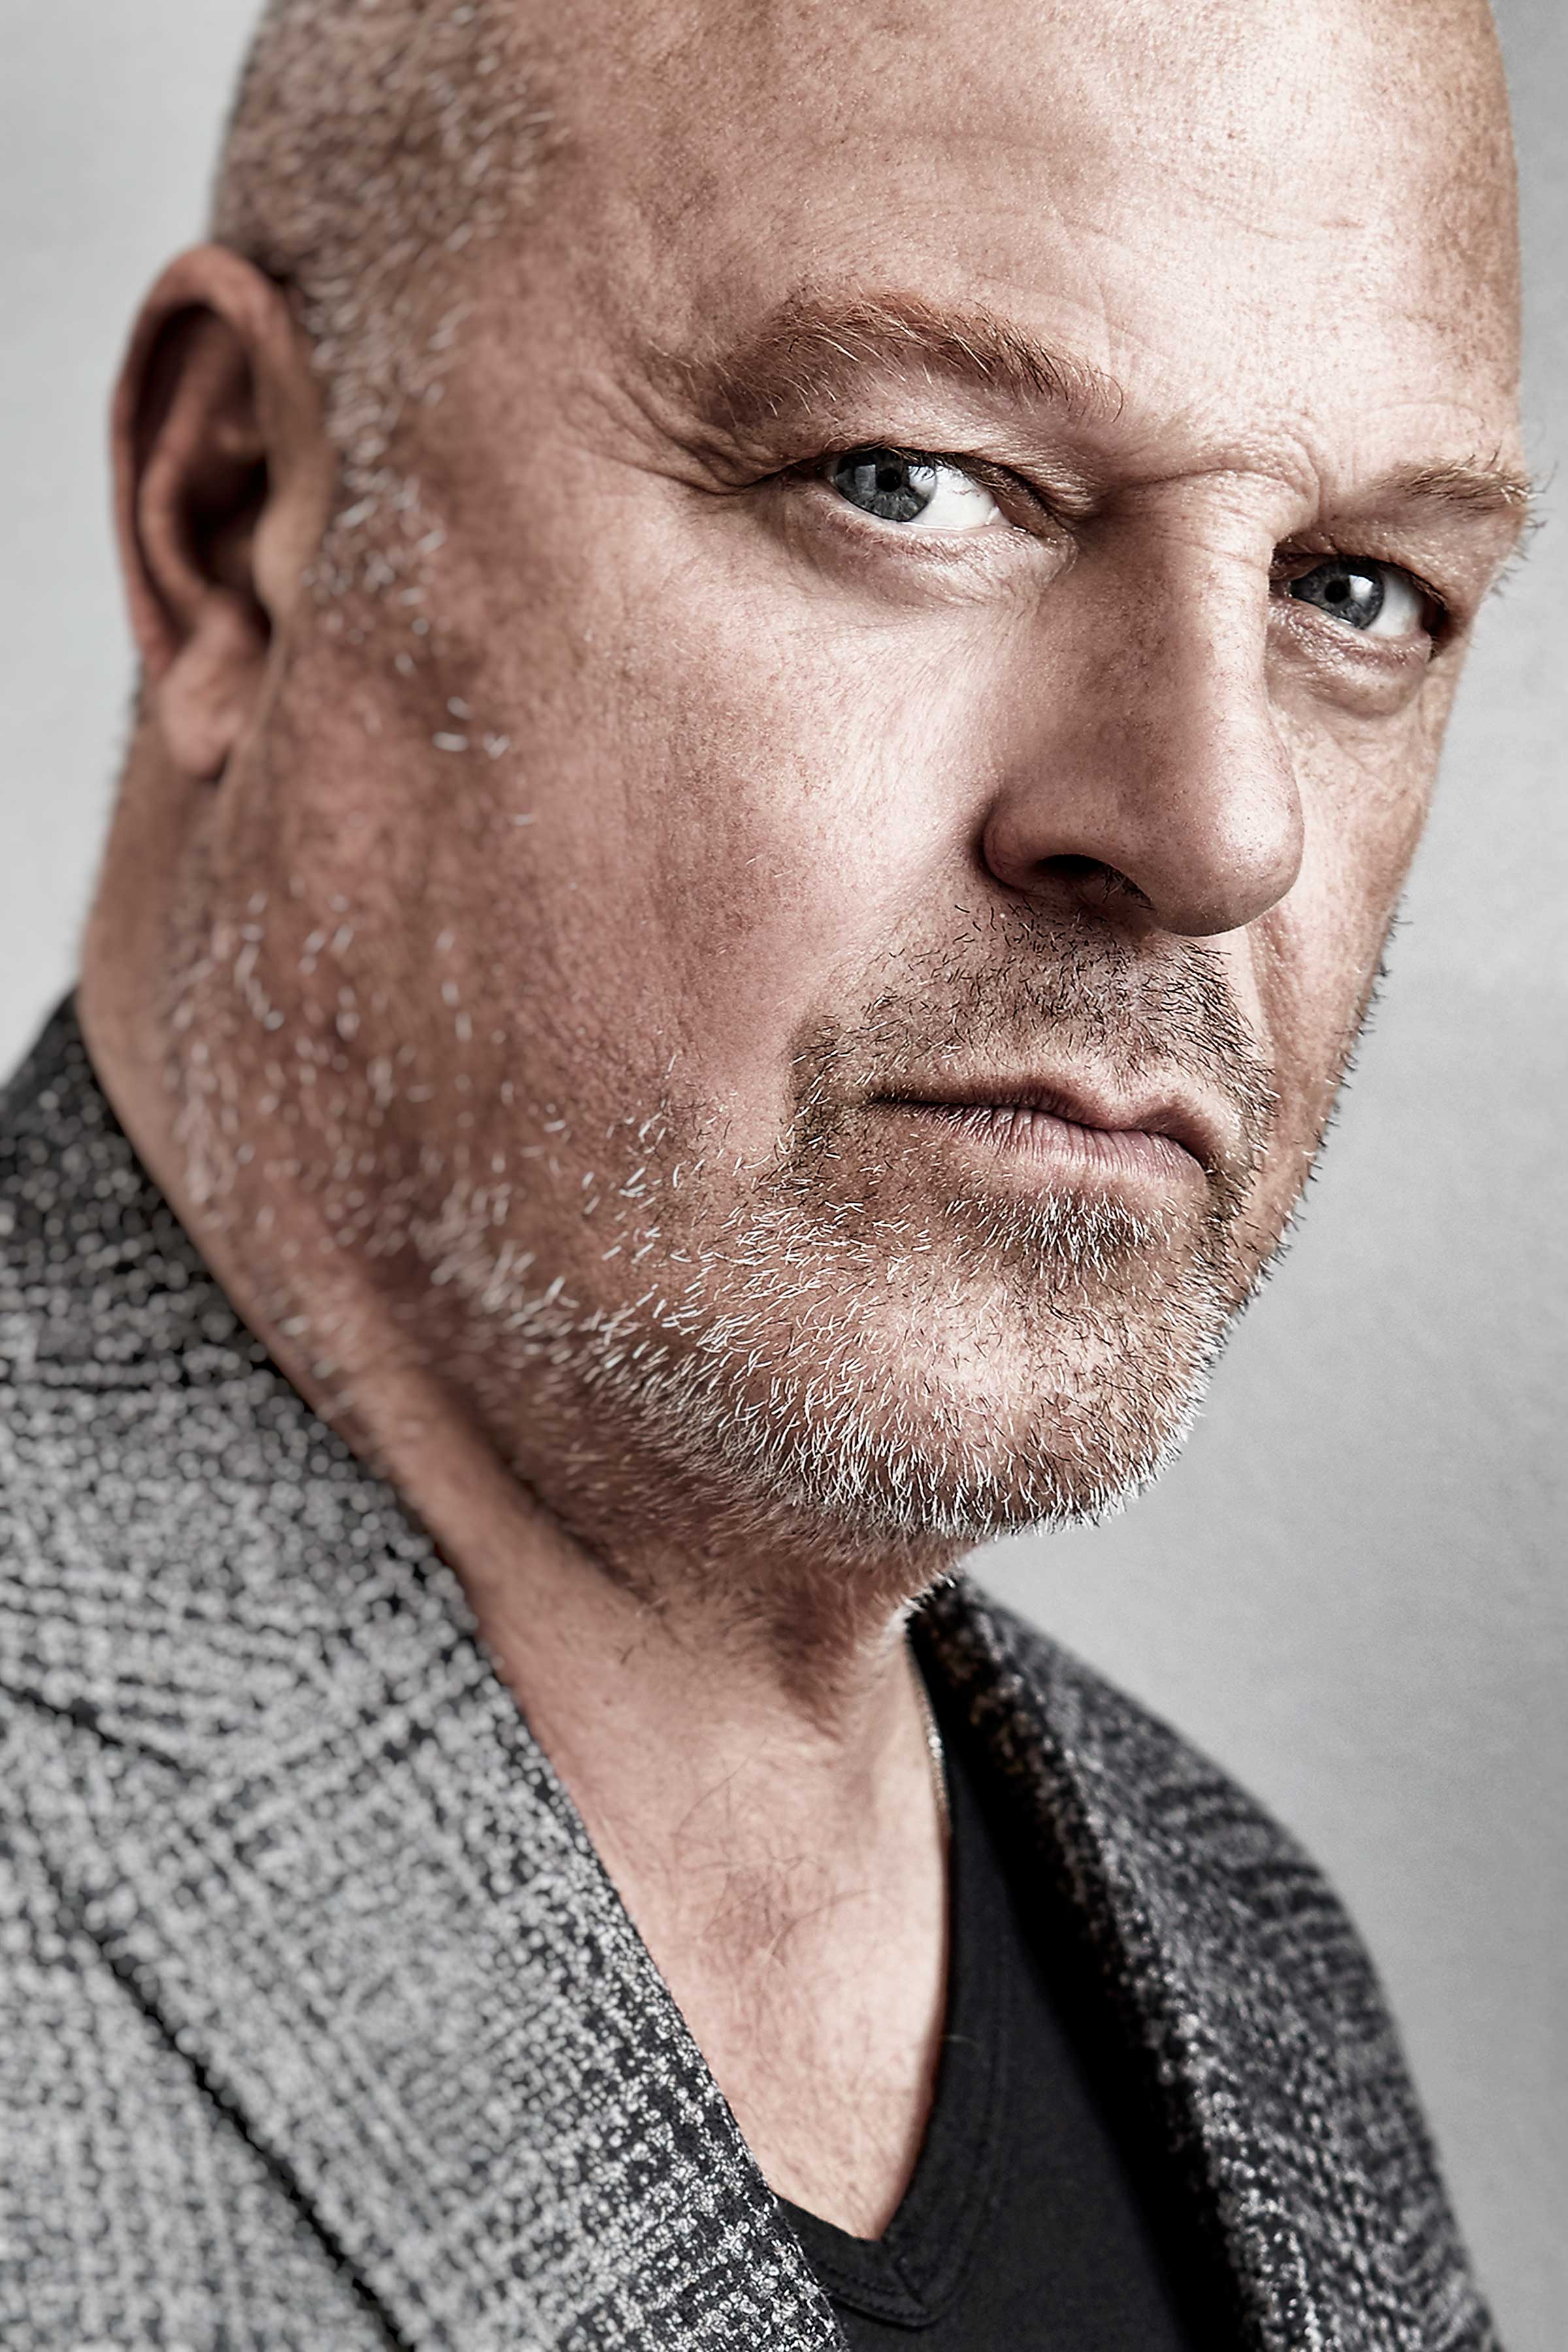 JSquared_GettyPeople_Coyote_MichaelChiklis_0688F2